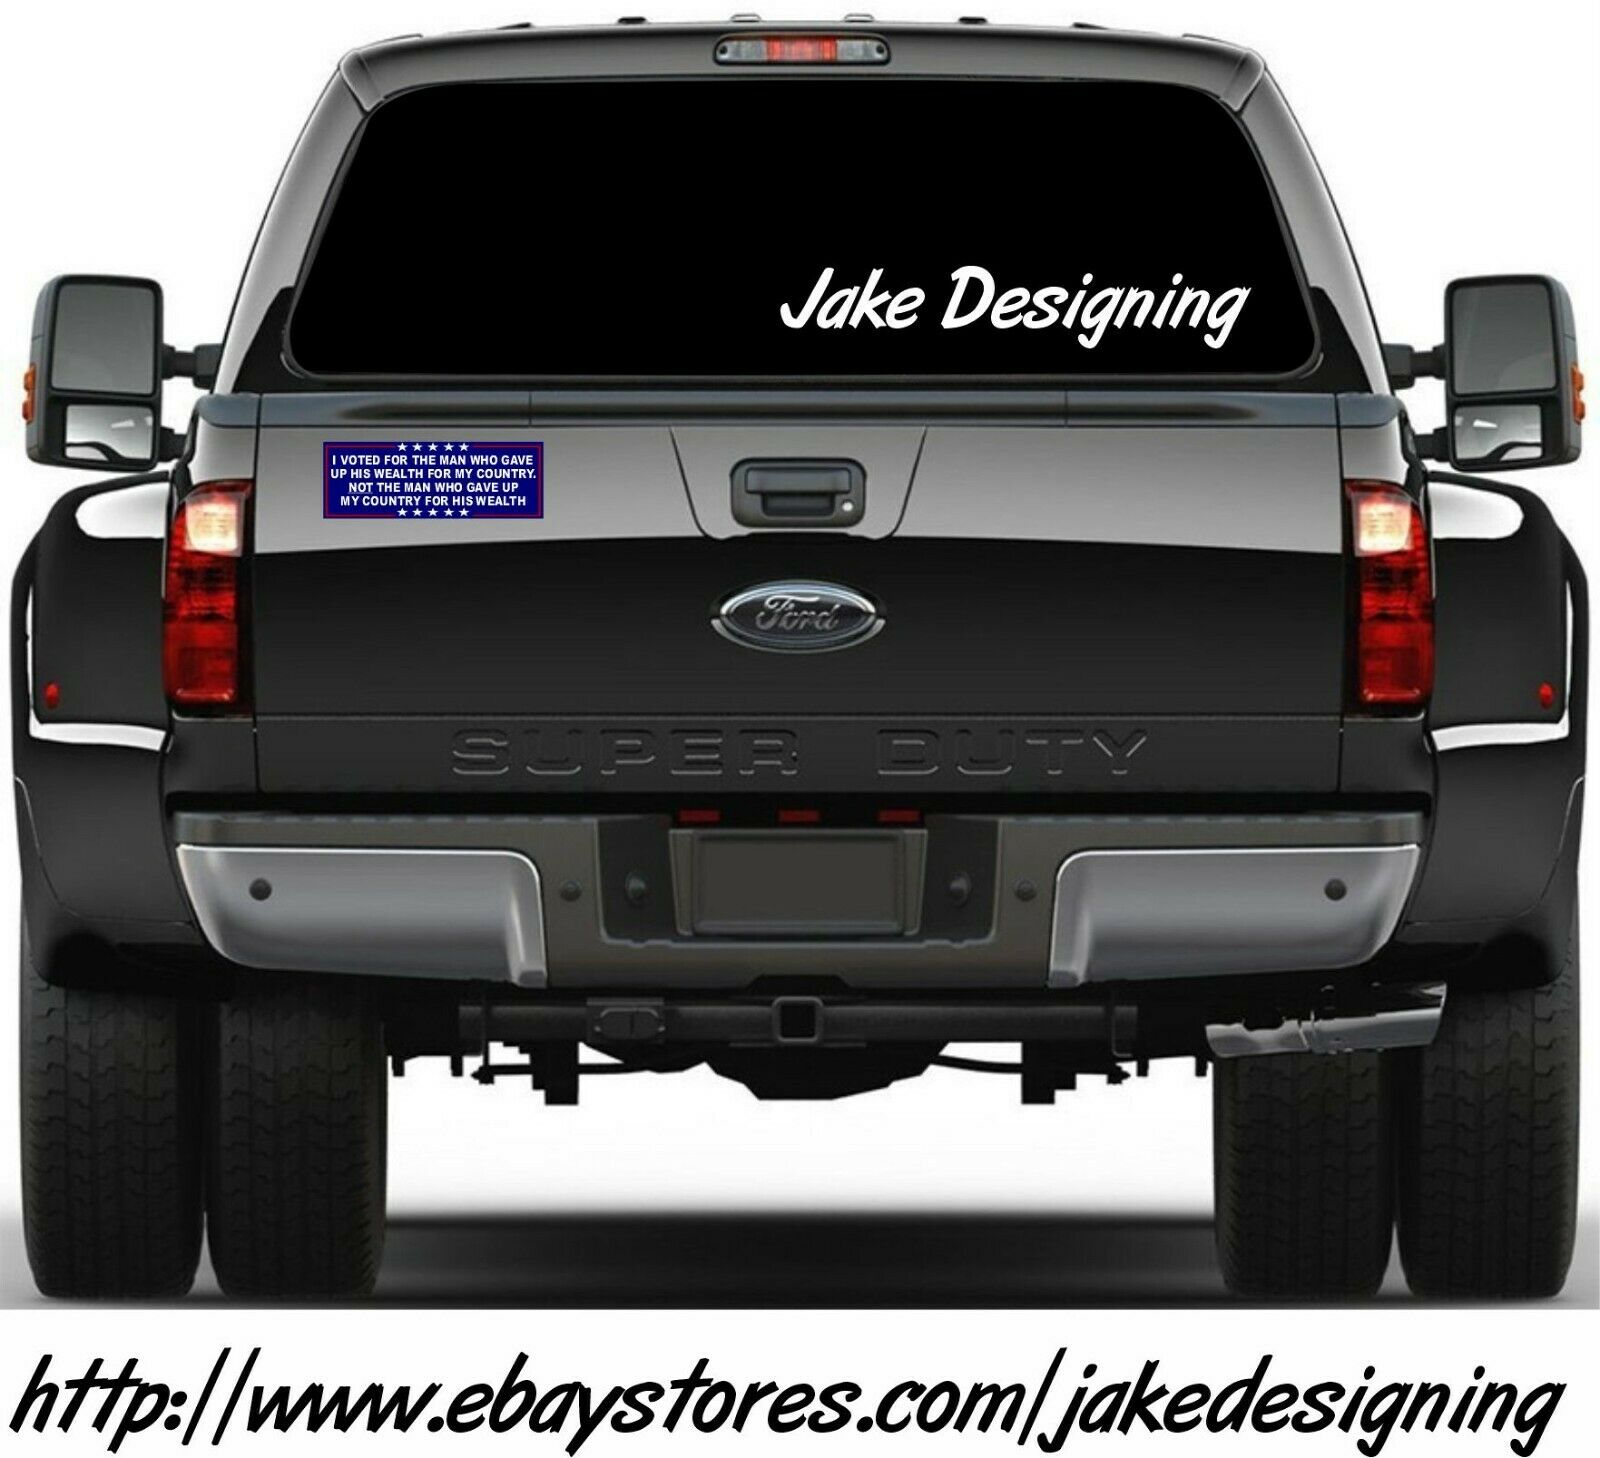 Anti Joe Biden AUTO MAGNET "GAVE UP MY COUNTRY FOR HIS WEALTH" MAGNET - Powercall Sirens LLC